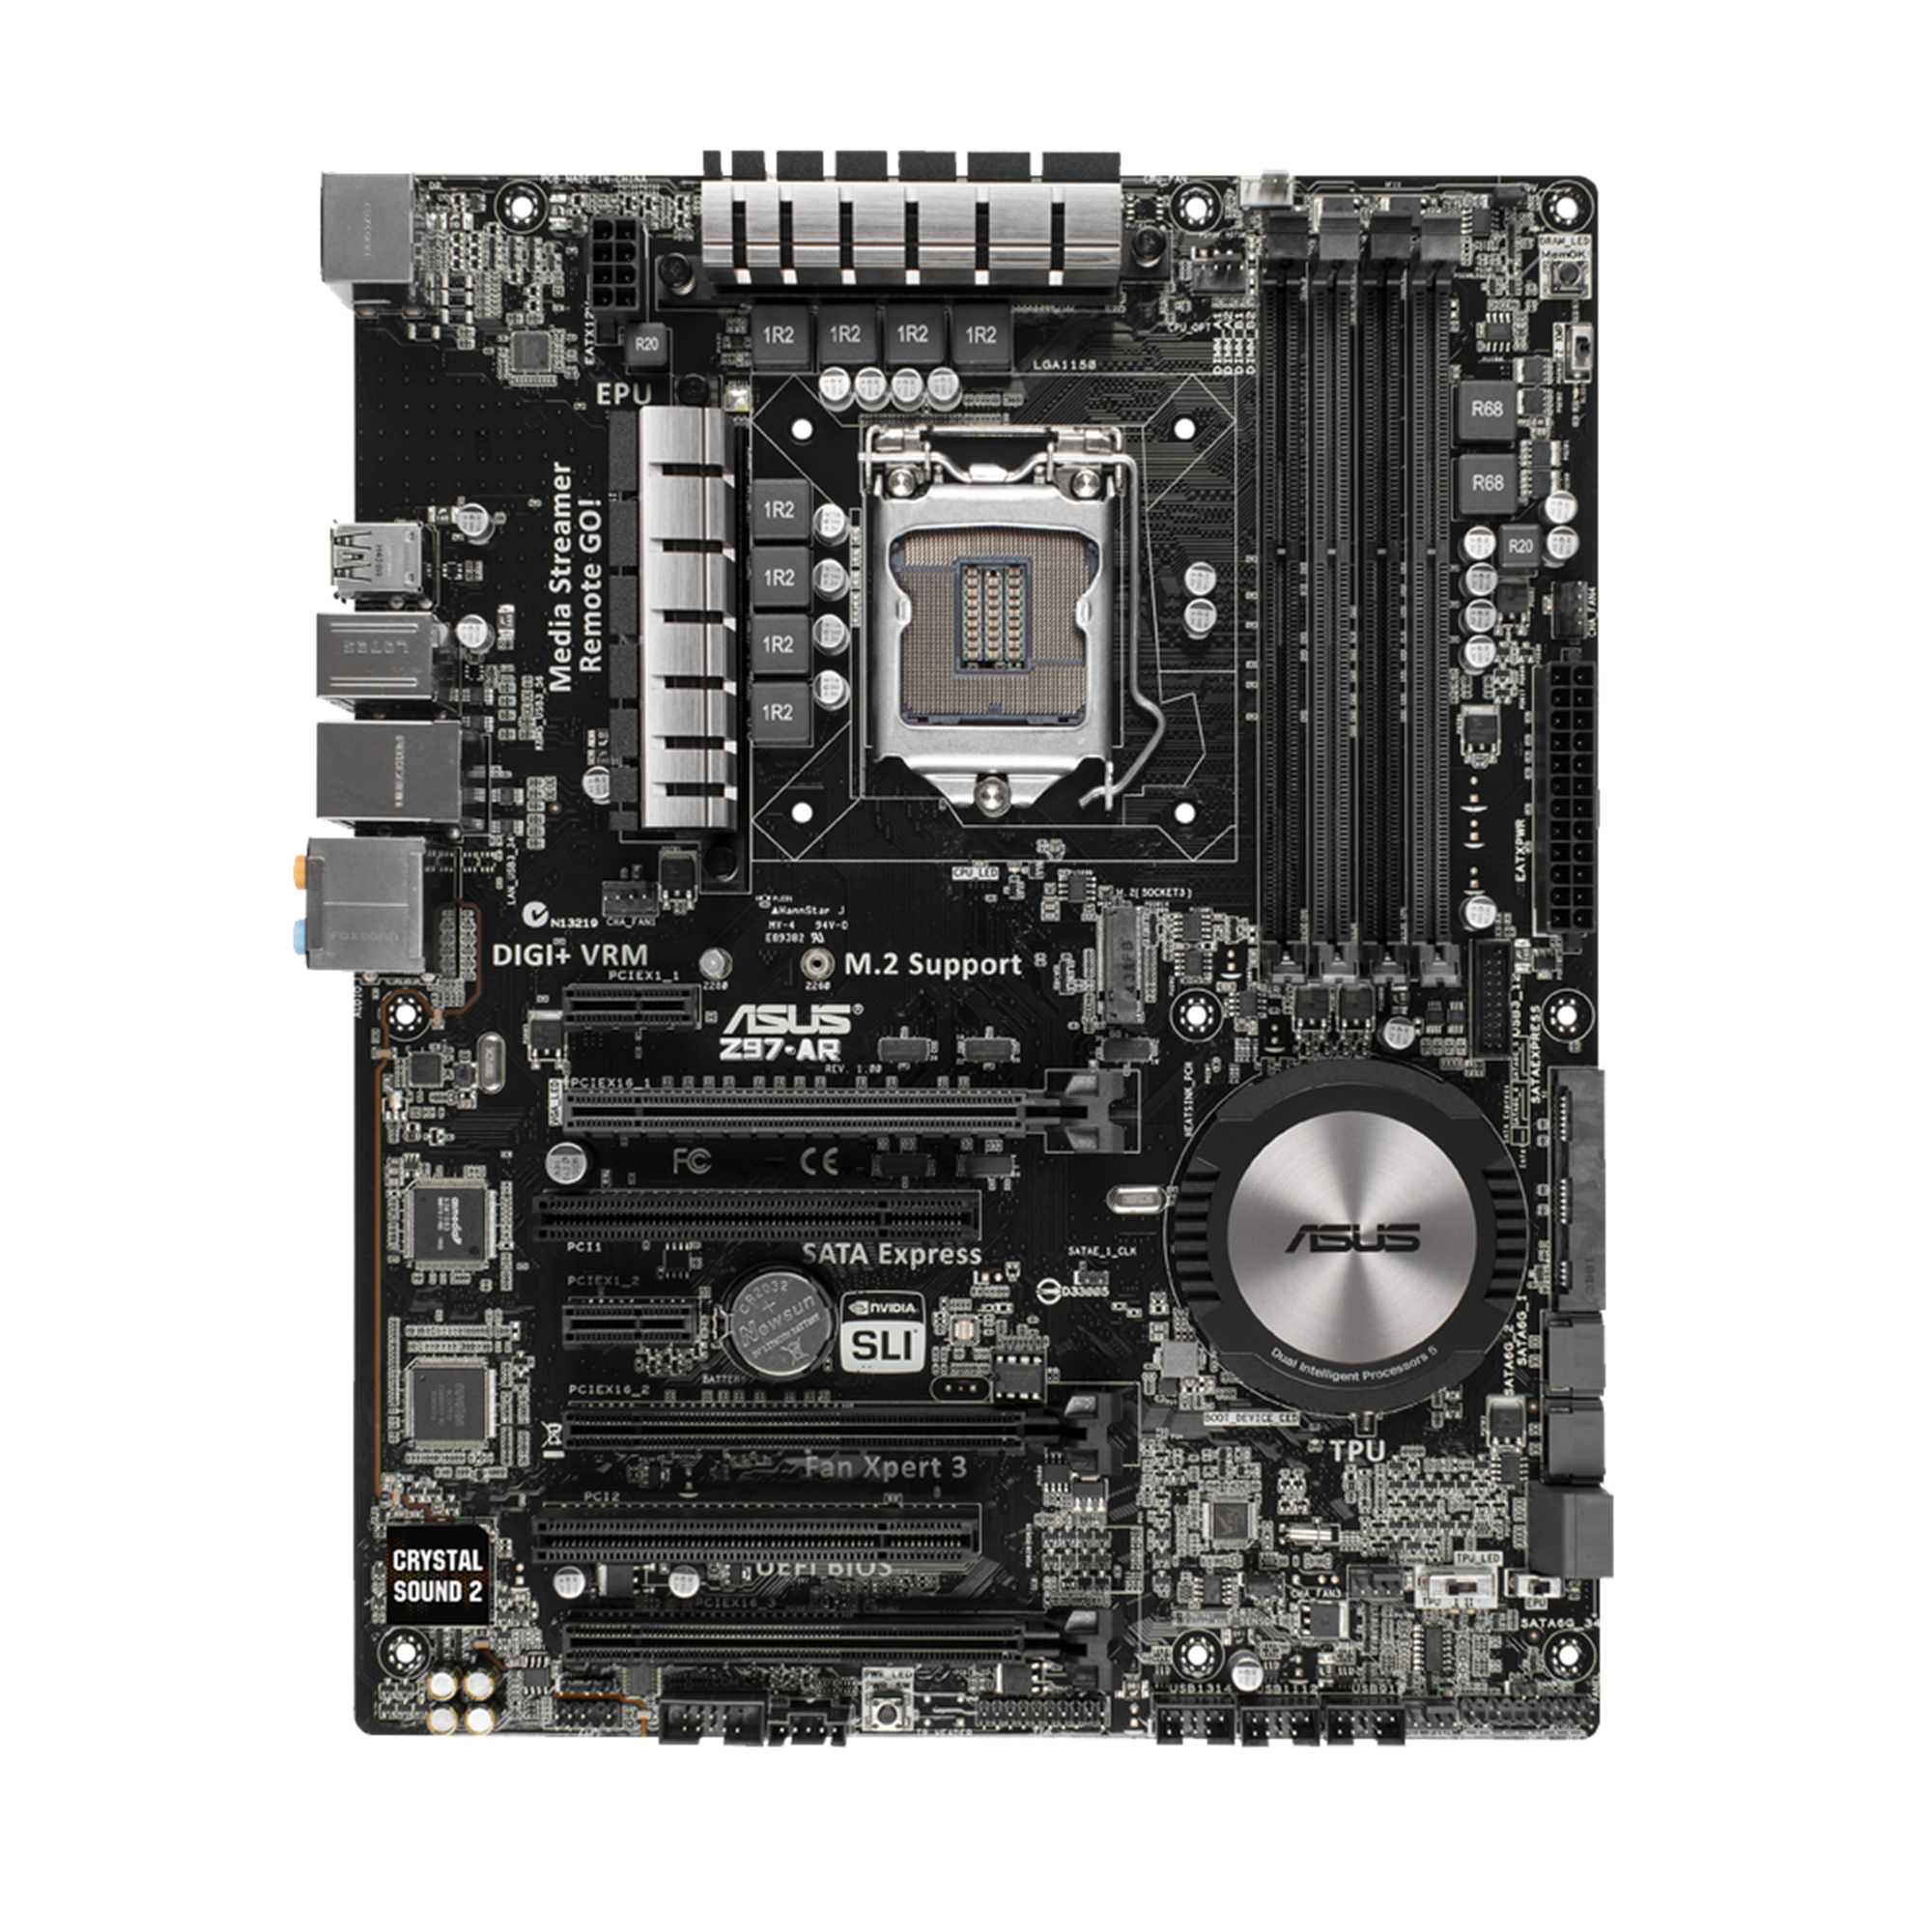 Motherboard support. ASUS z97. Материнская плата ASUS Z 1150. ASUS z97 a z97c. ASUS Fan Xpert 2 материнская плата.